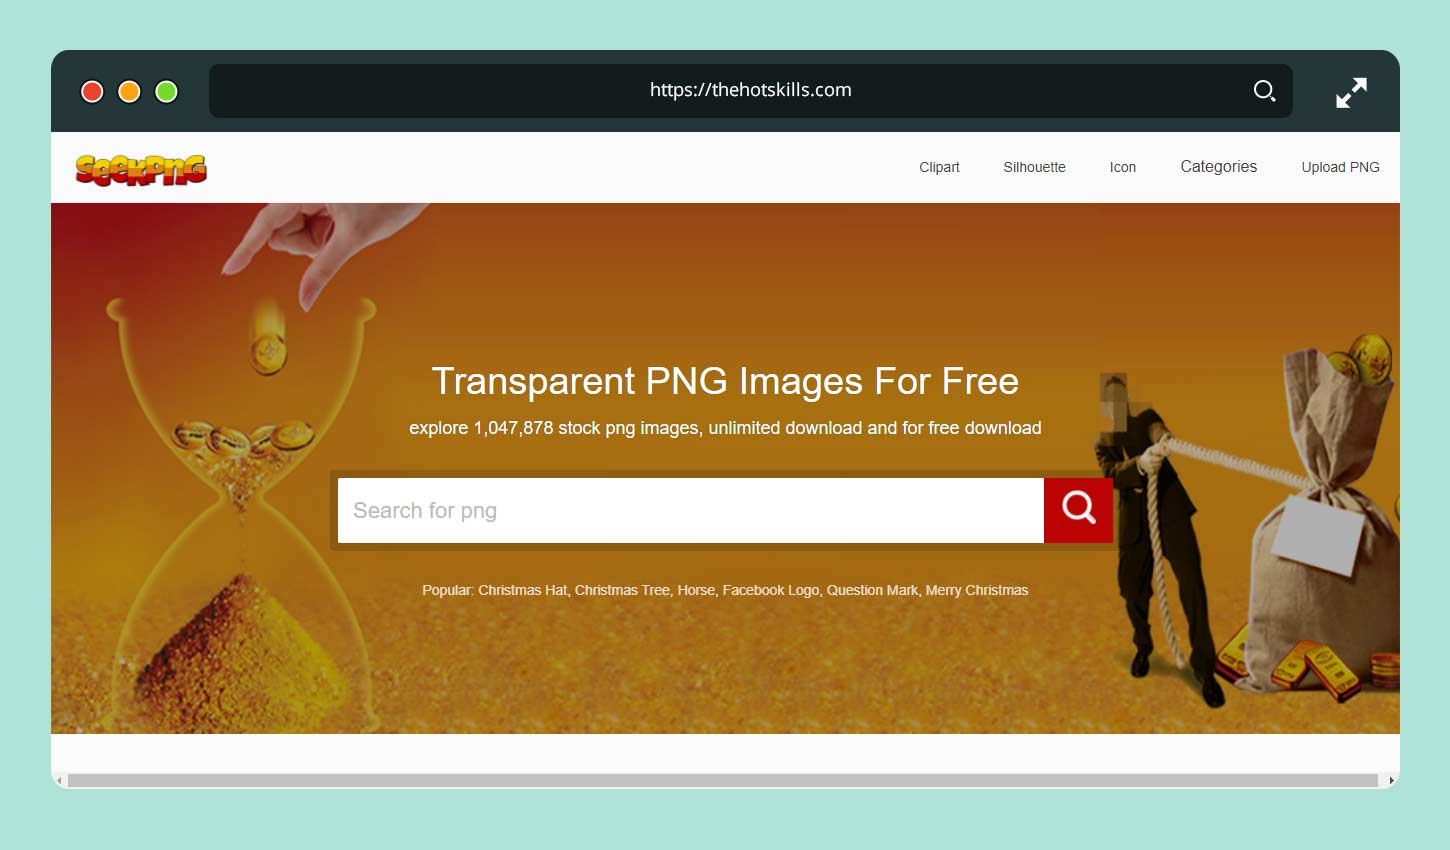 Transparent PNG Images For Free